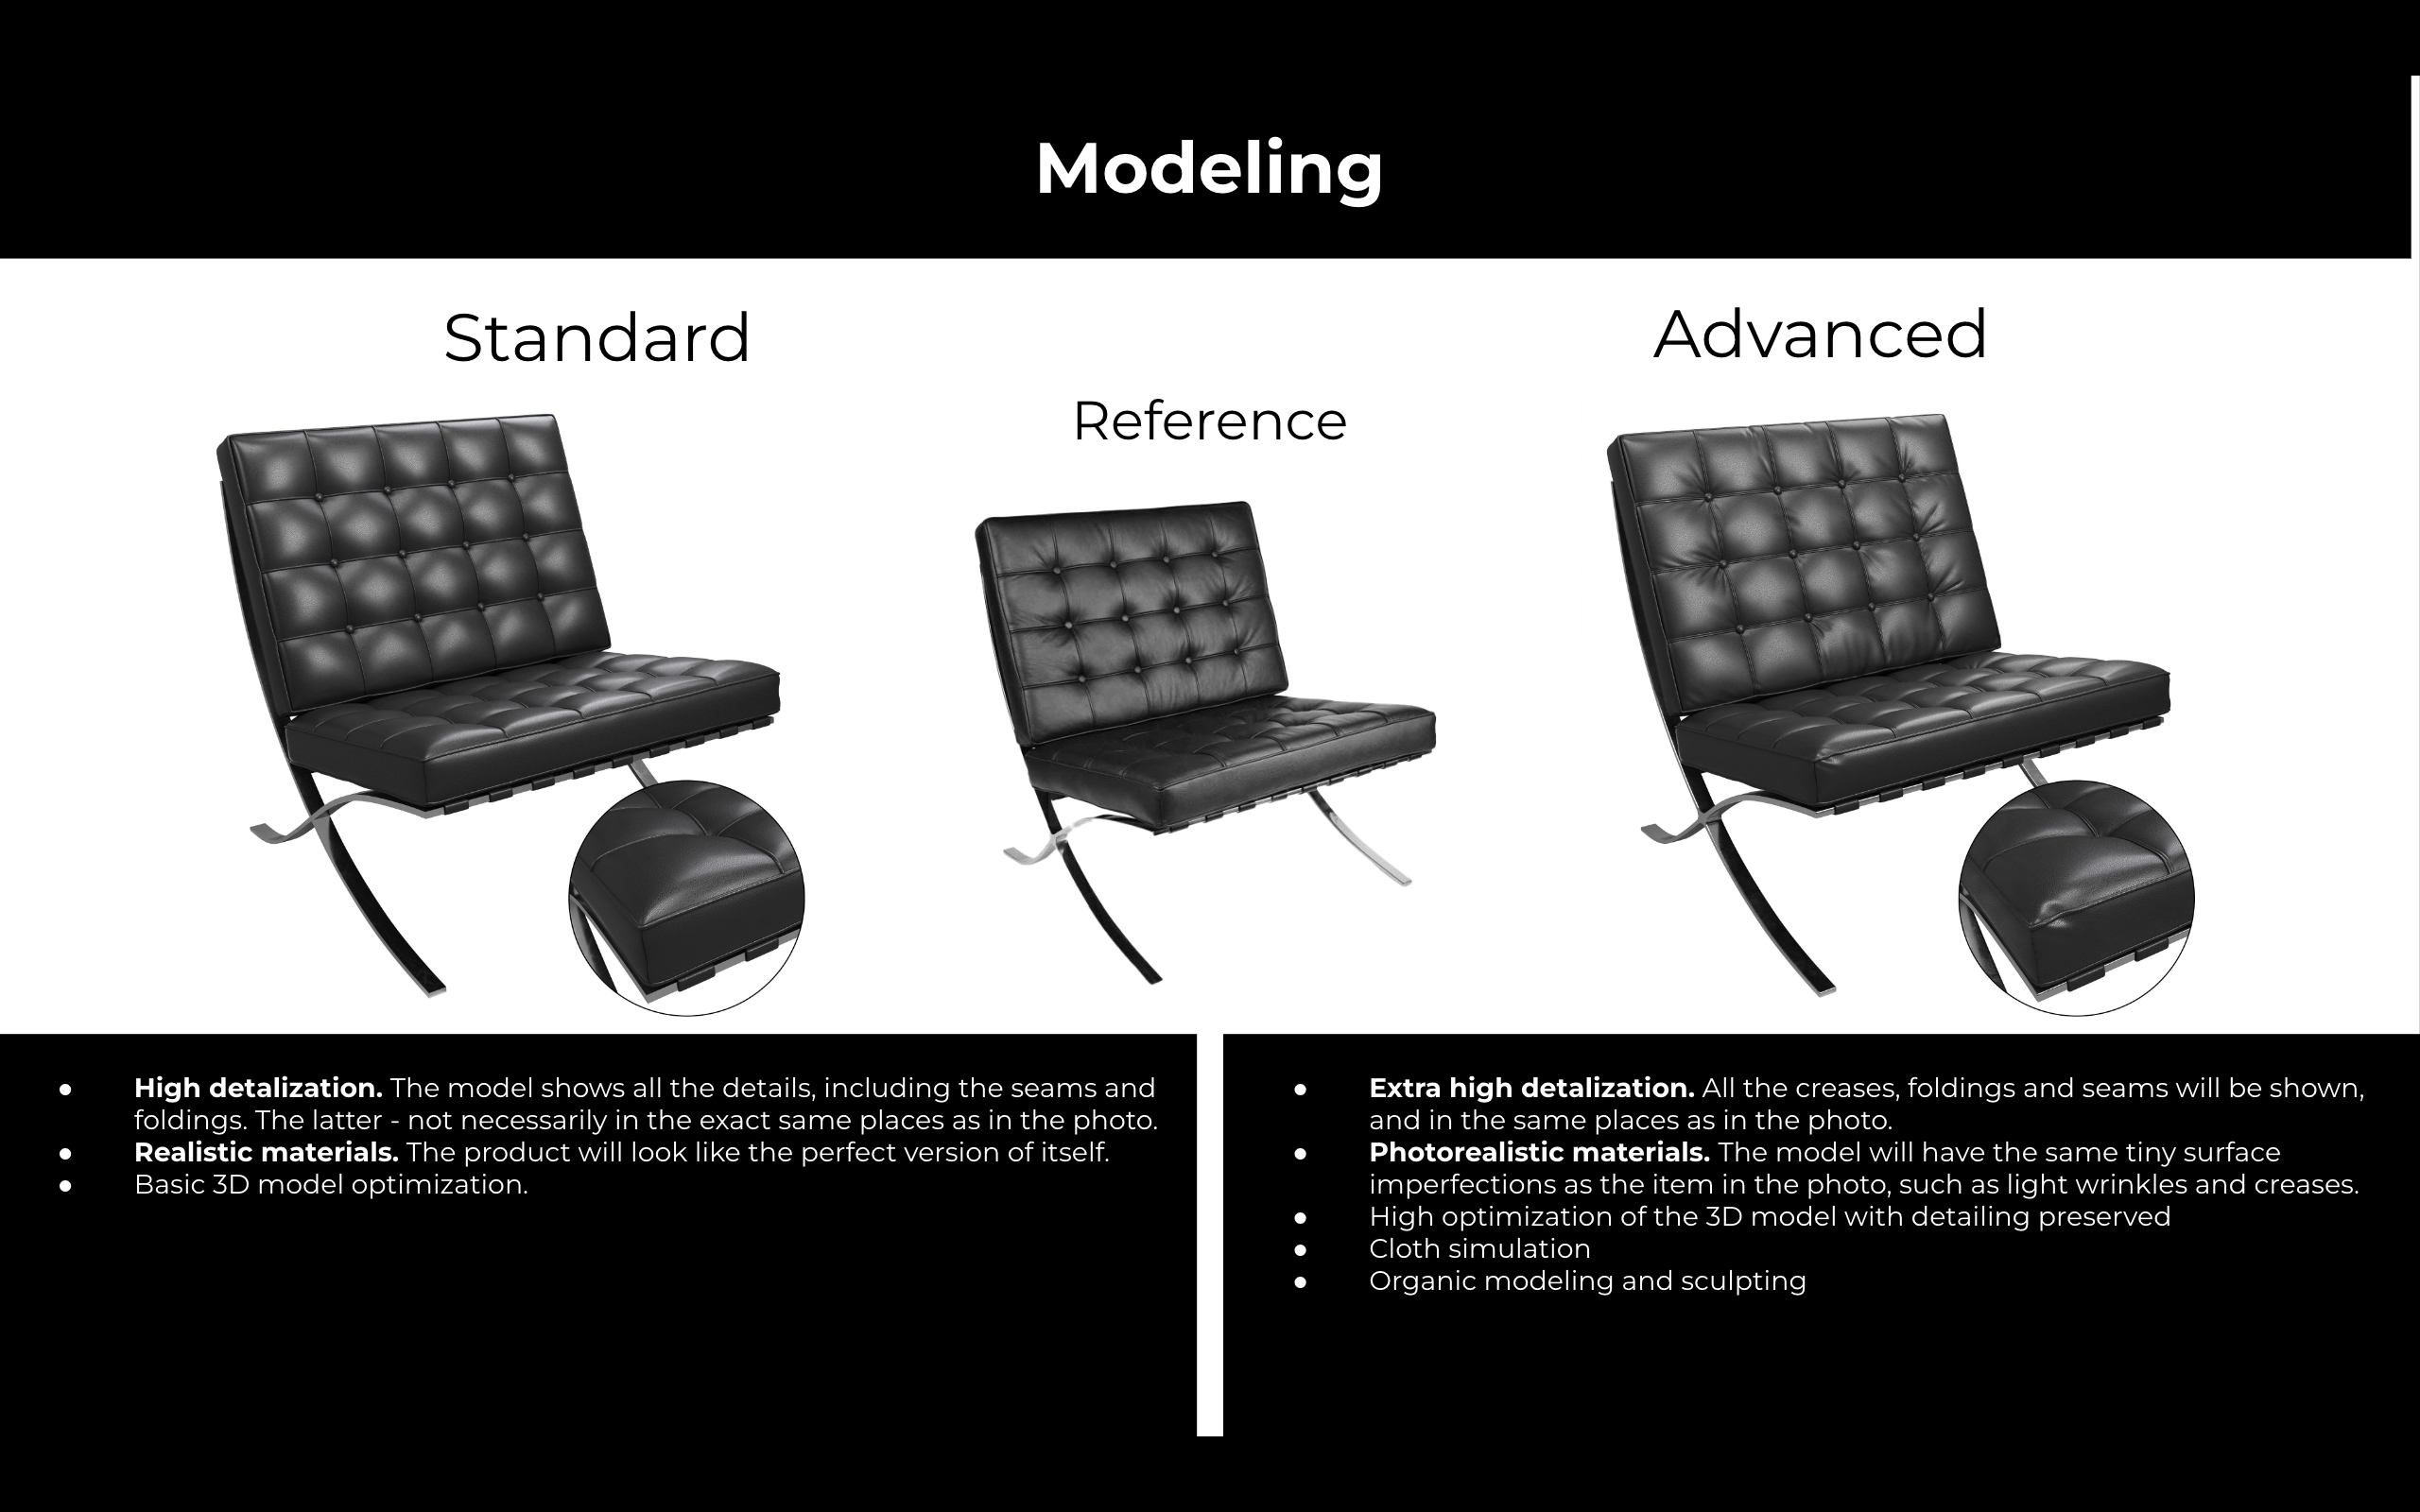 Types of 3D Modeling